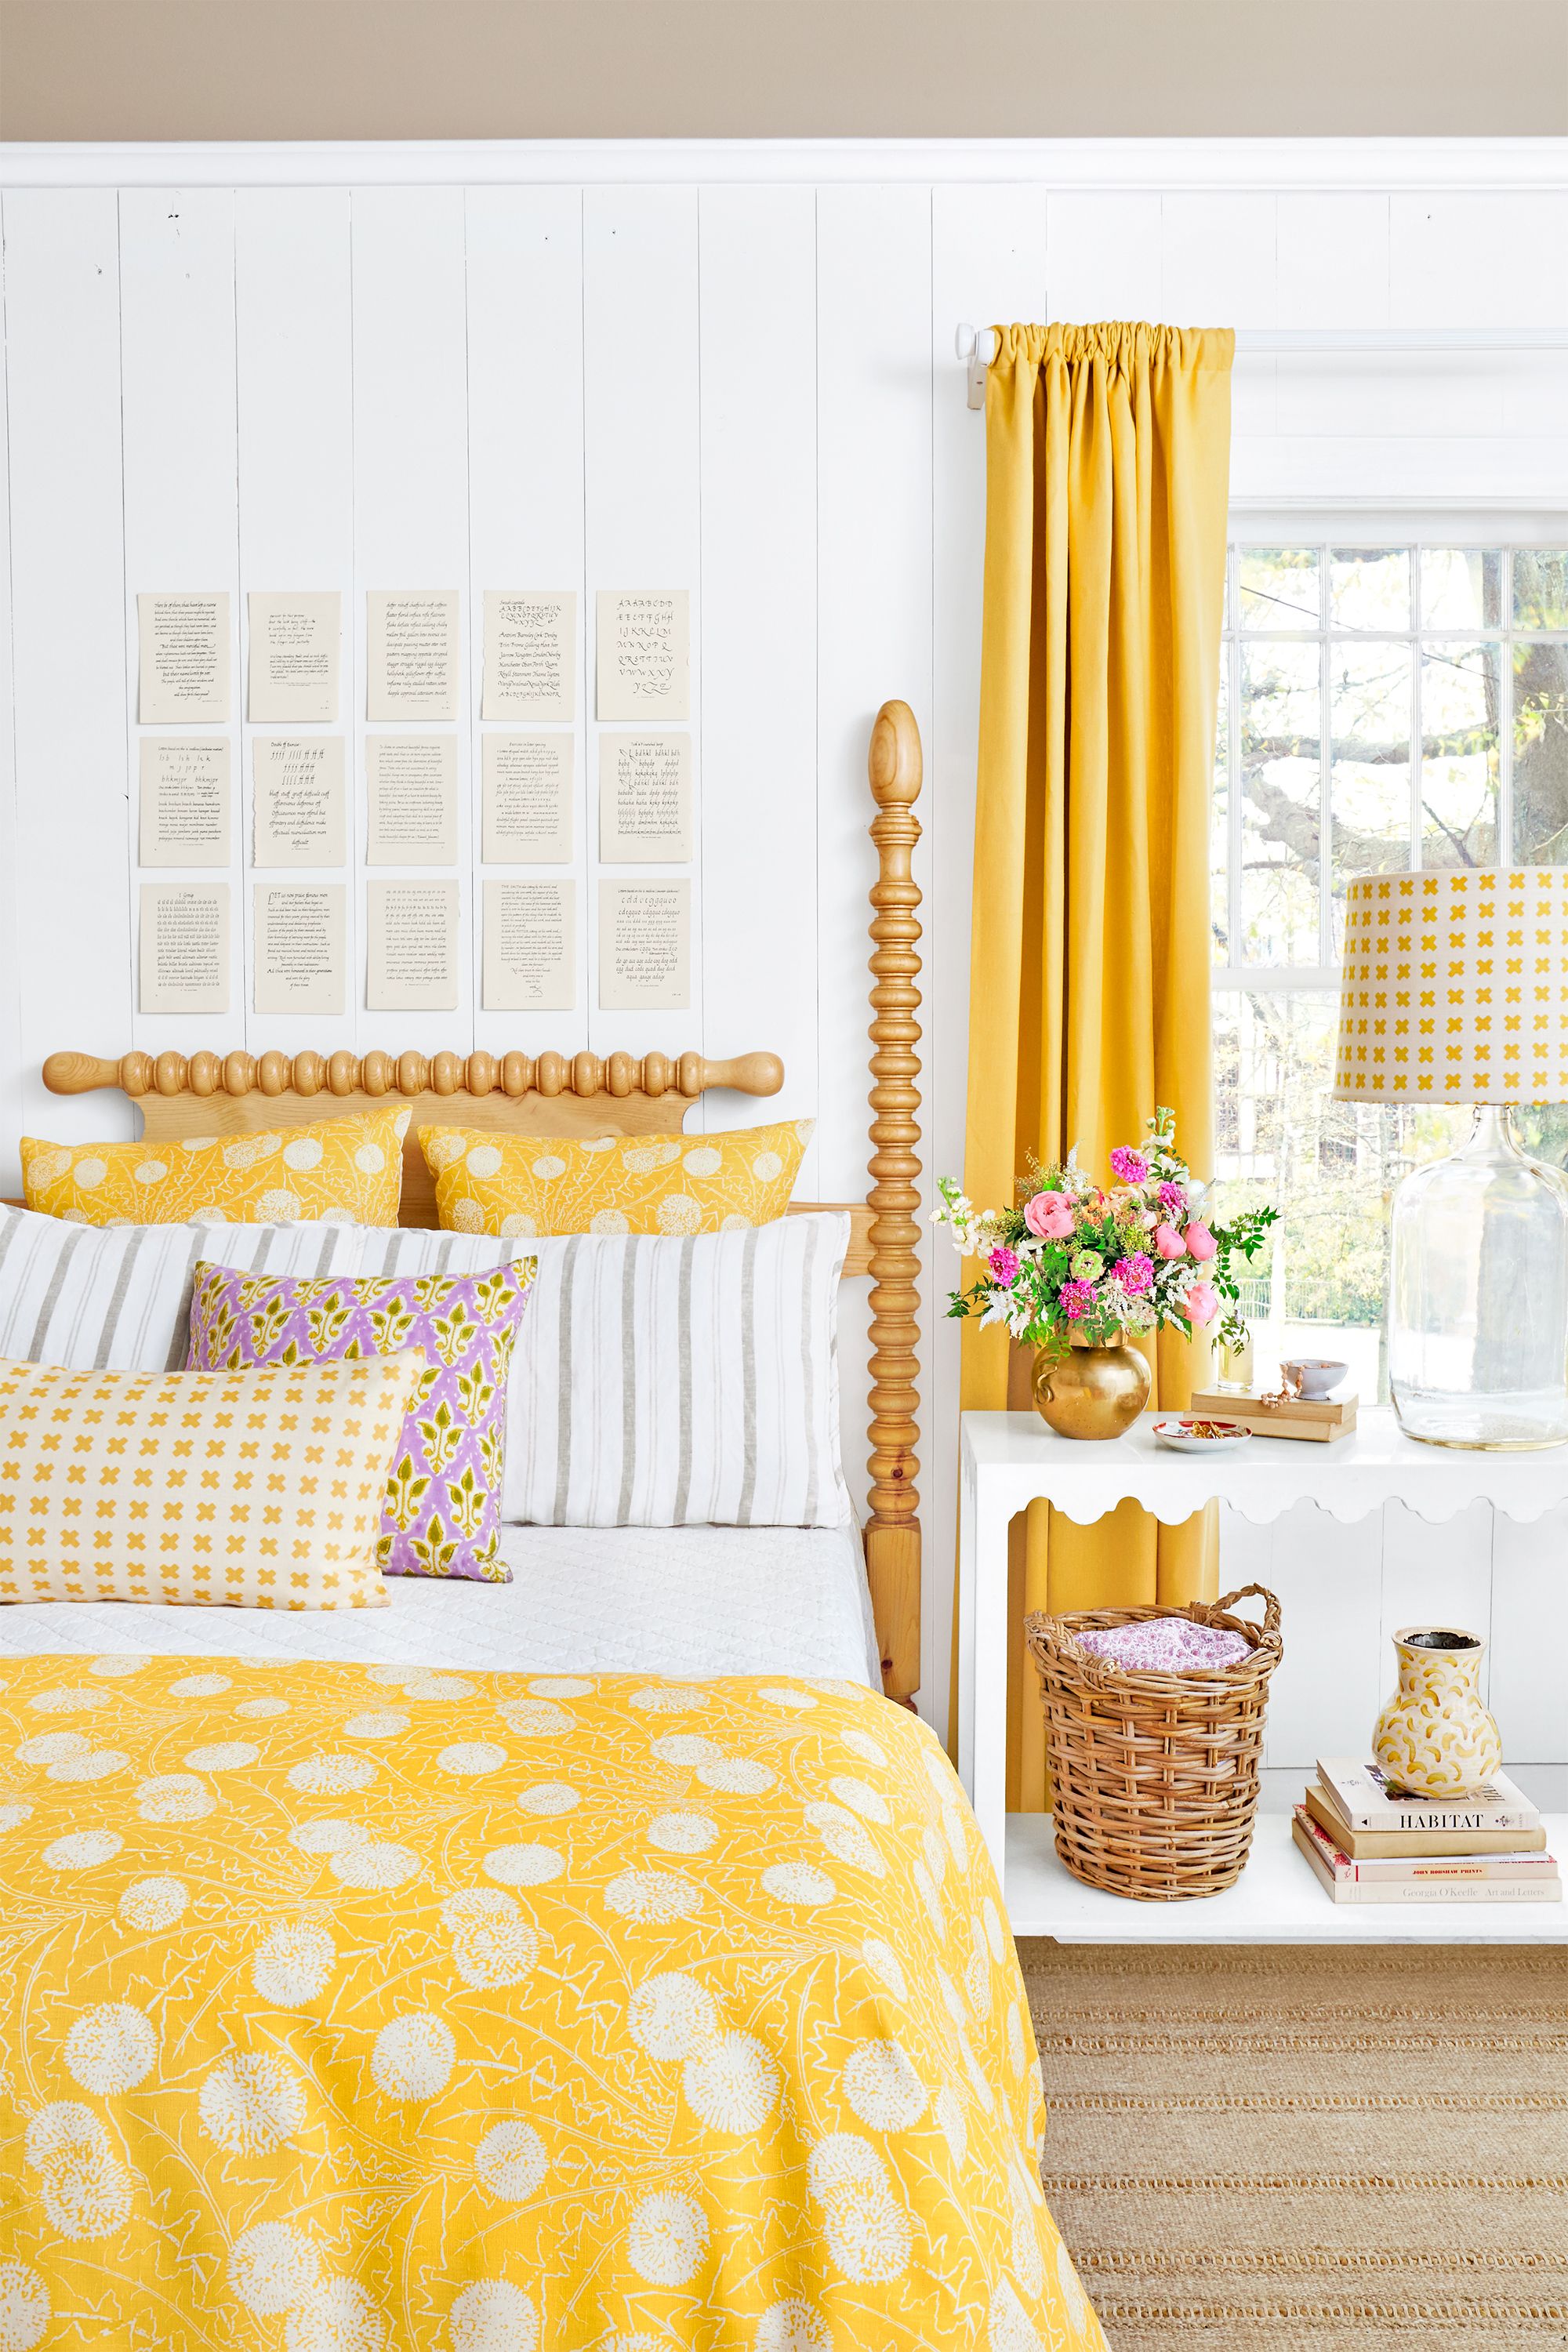 18 Cheerful Yellow Bedrooms   Chic Ideas for Yellow Bedroom Decor